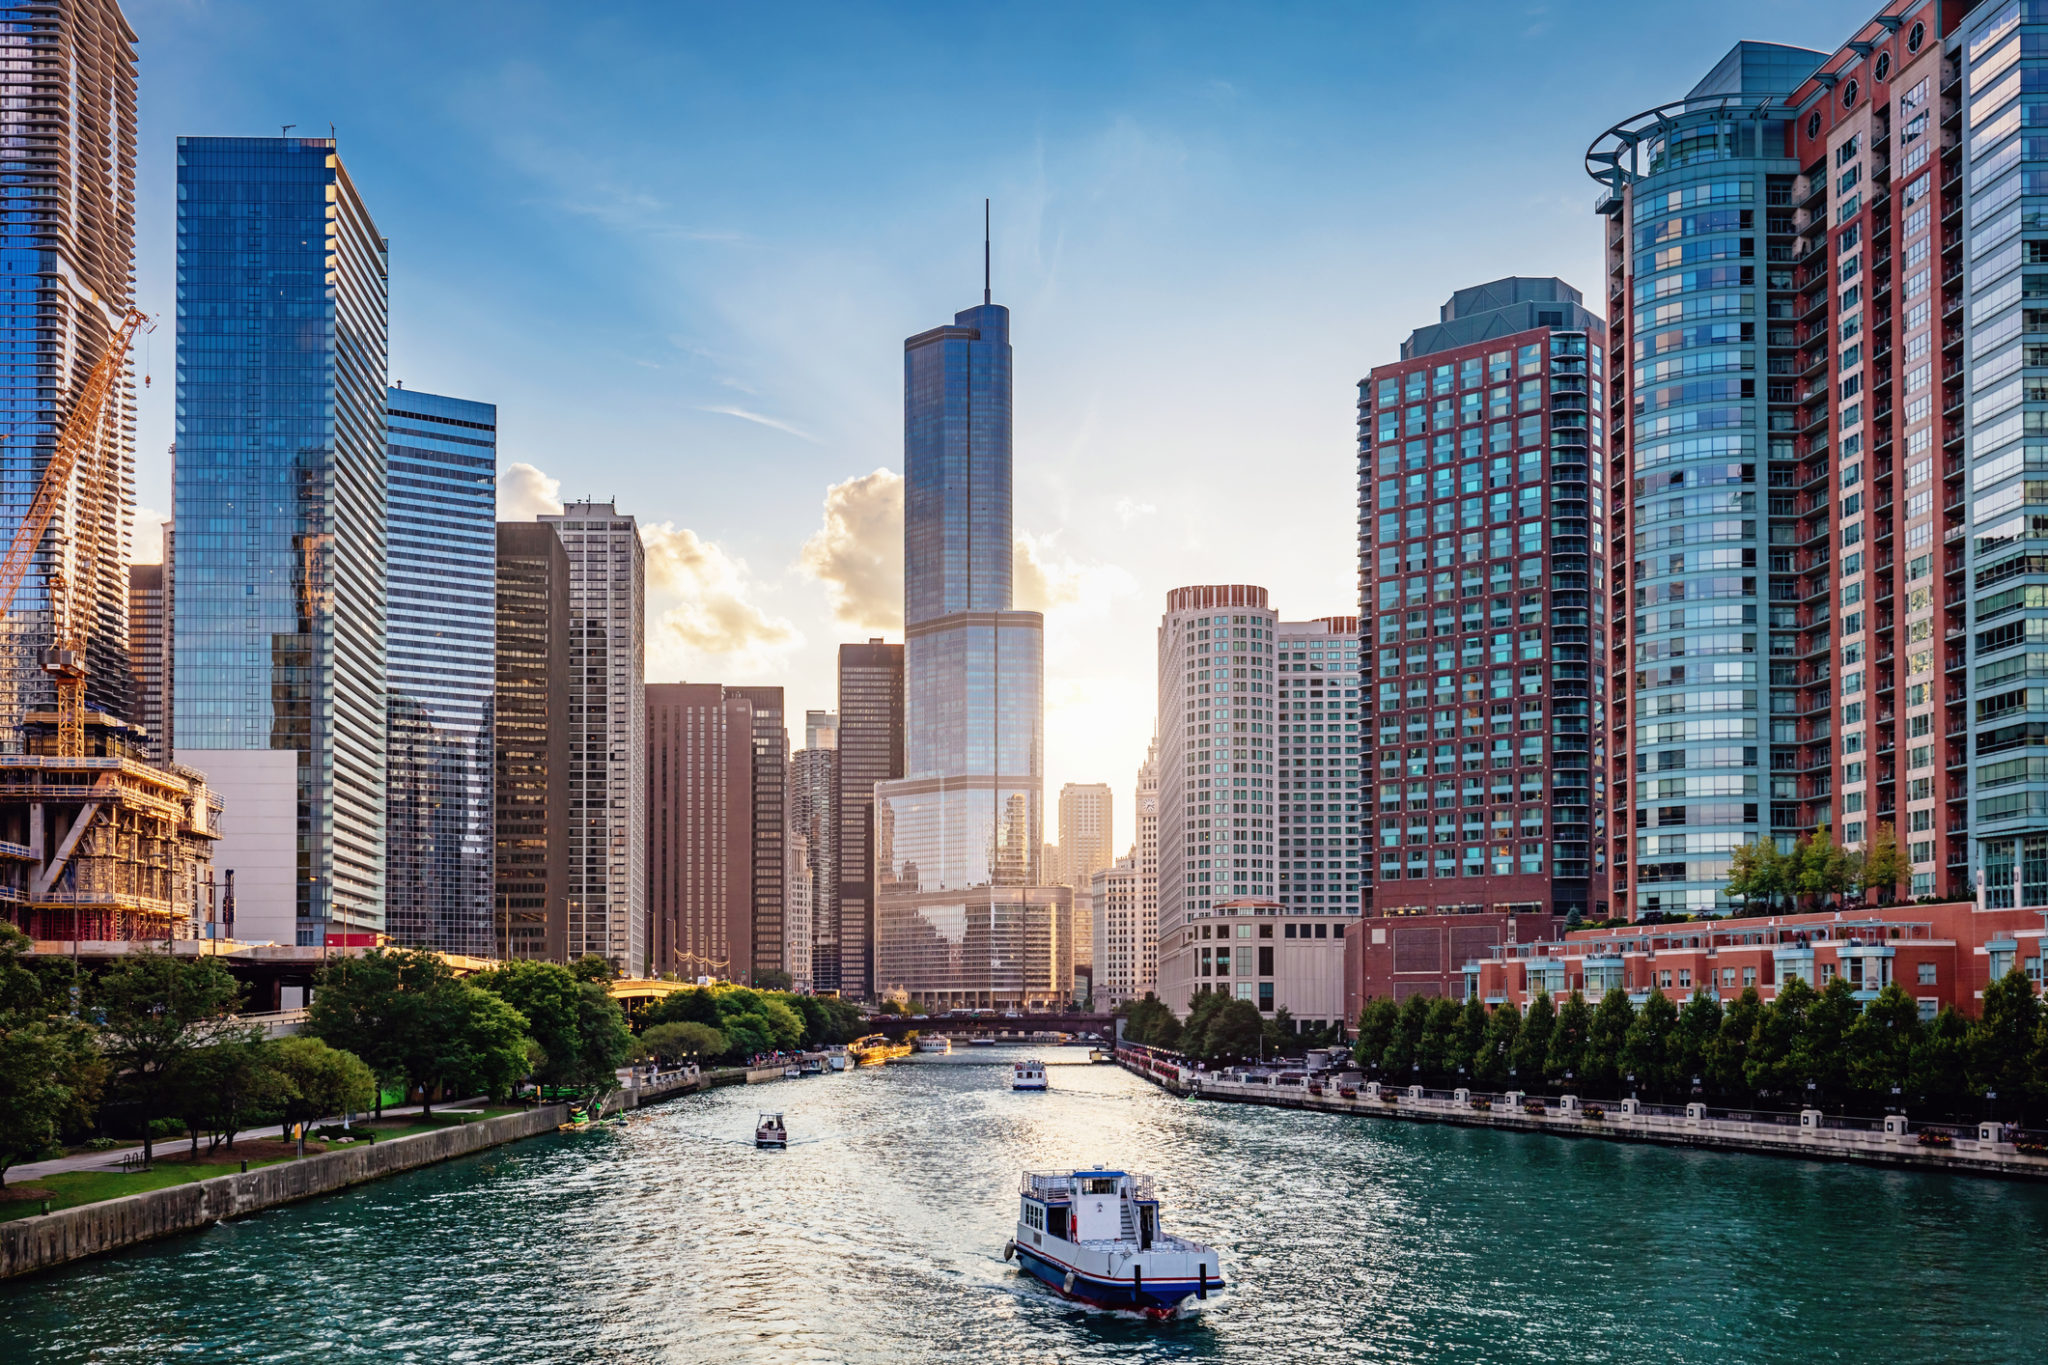 Plan an Extended Stay in Chicago